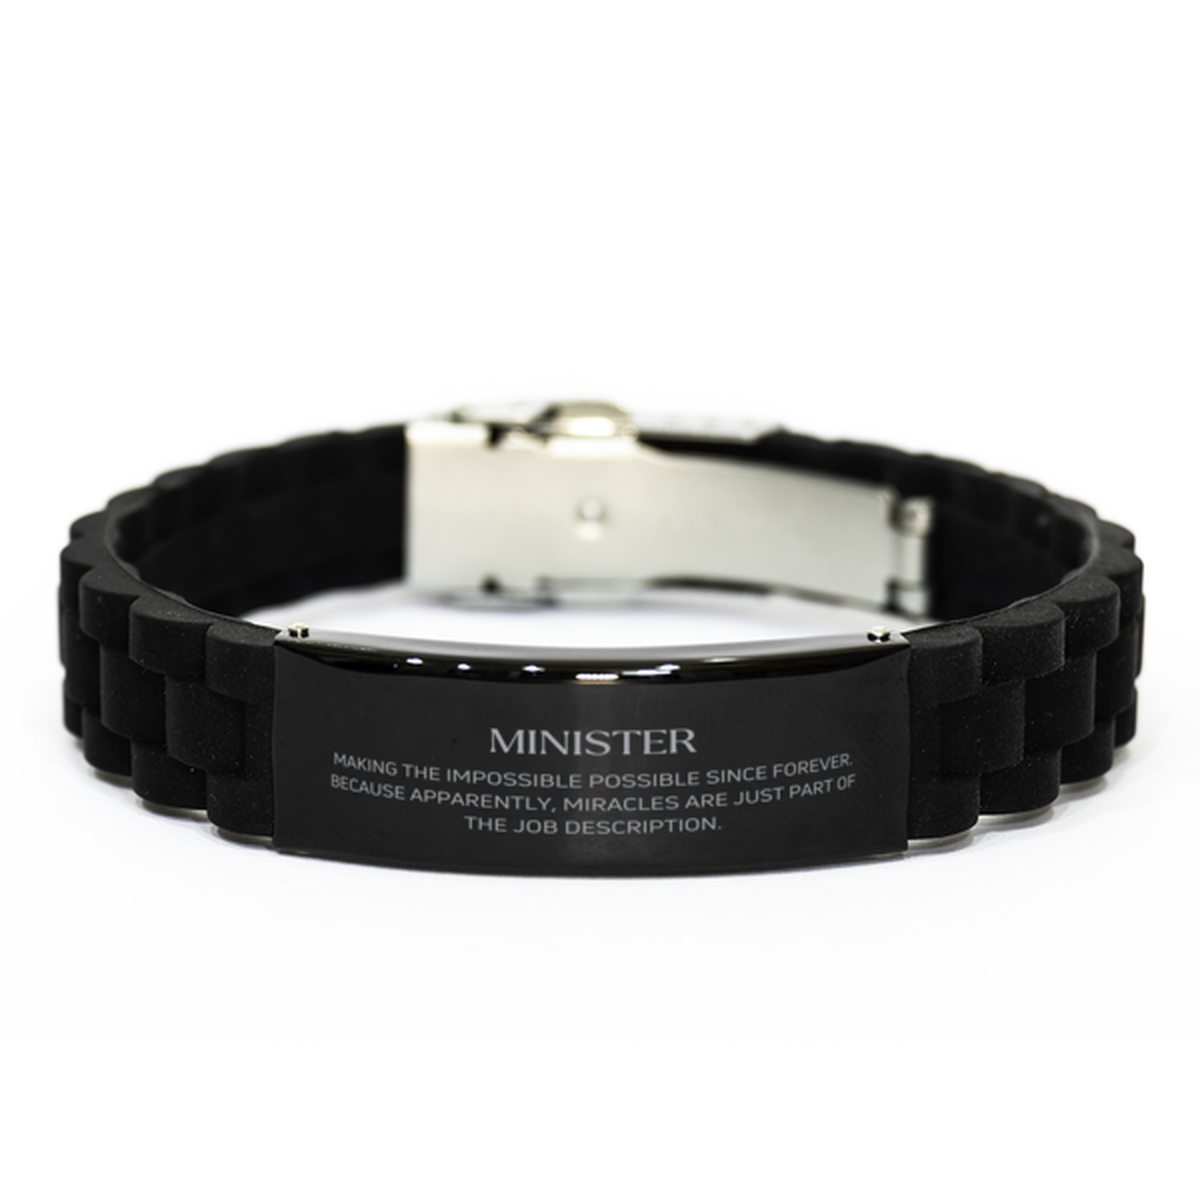 Funny Minister Gifts, Miracles are just part of the job description, Inspirational Birthday Black Glidelock Clasp Bracelet For Minister, Men, Women, Coworkers, Friends, Boss